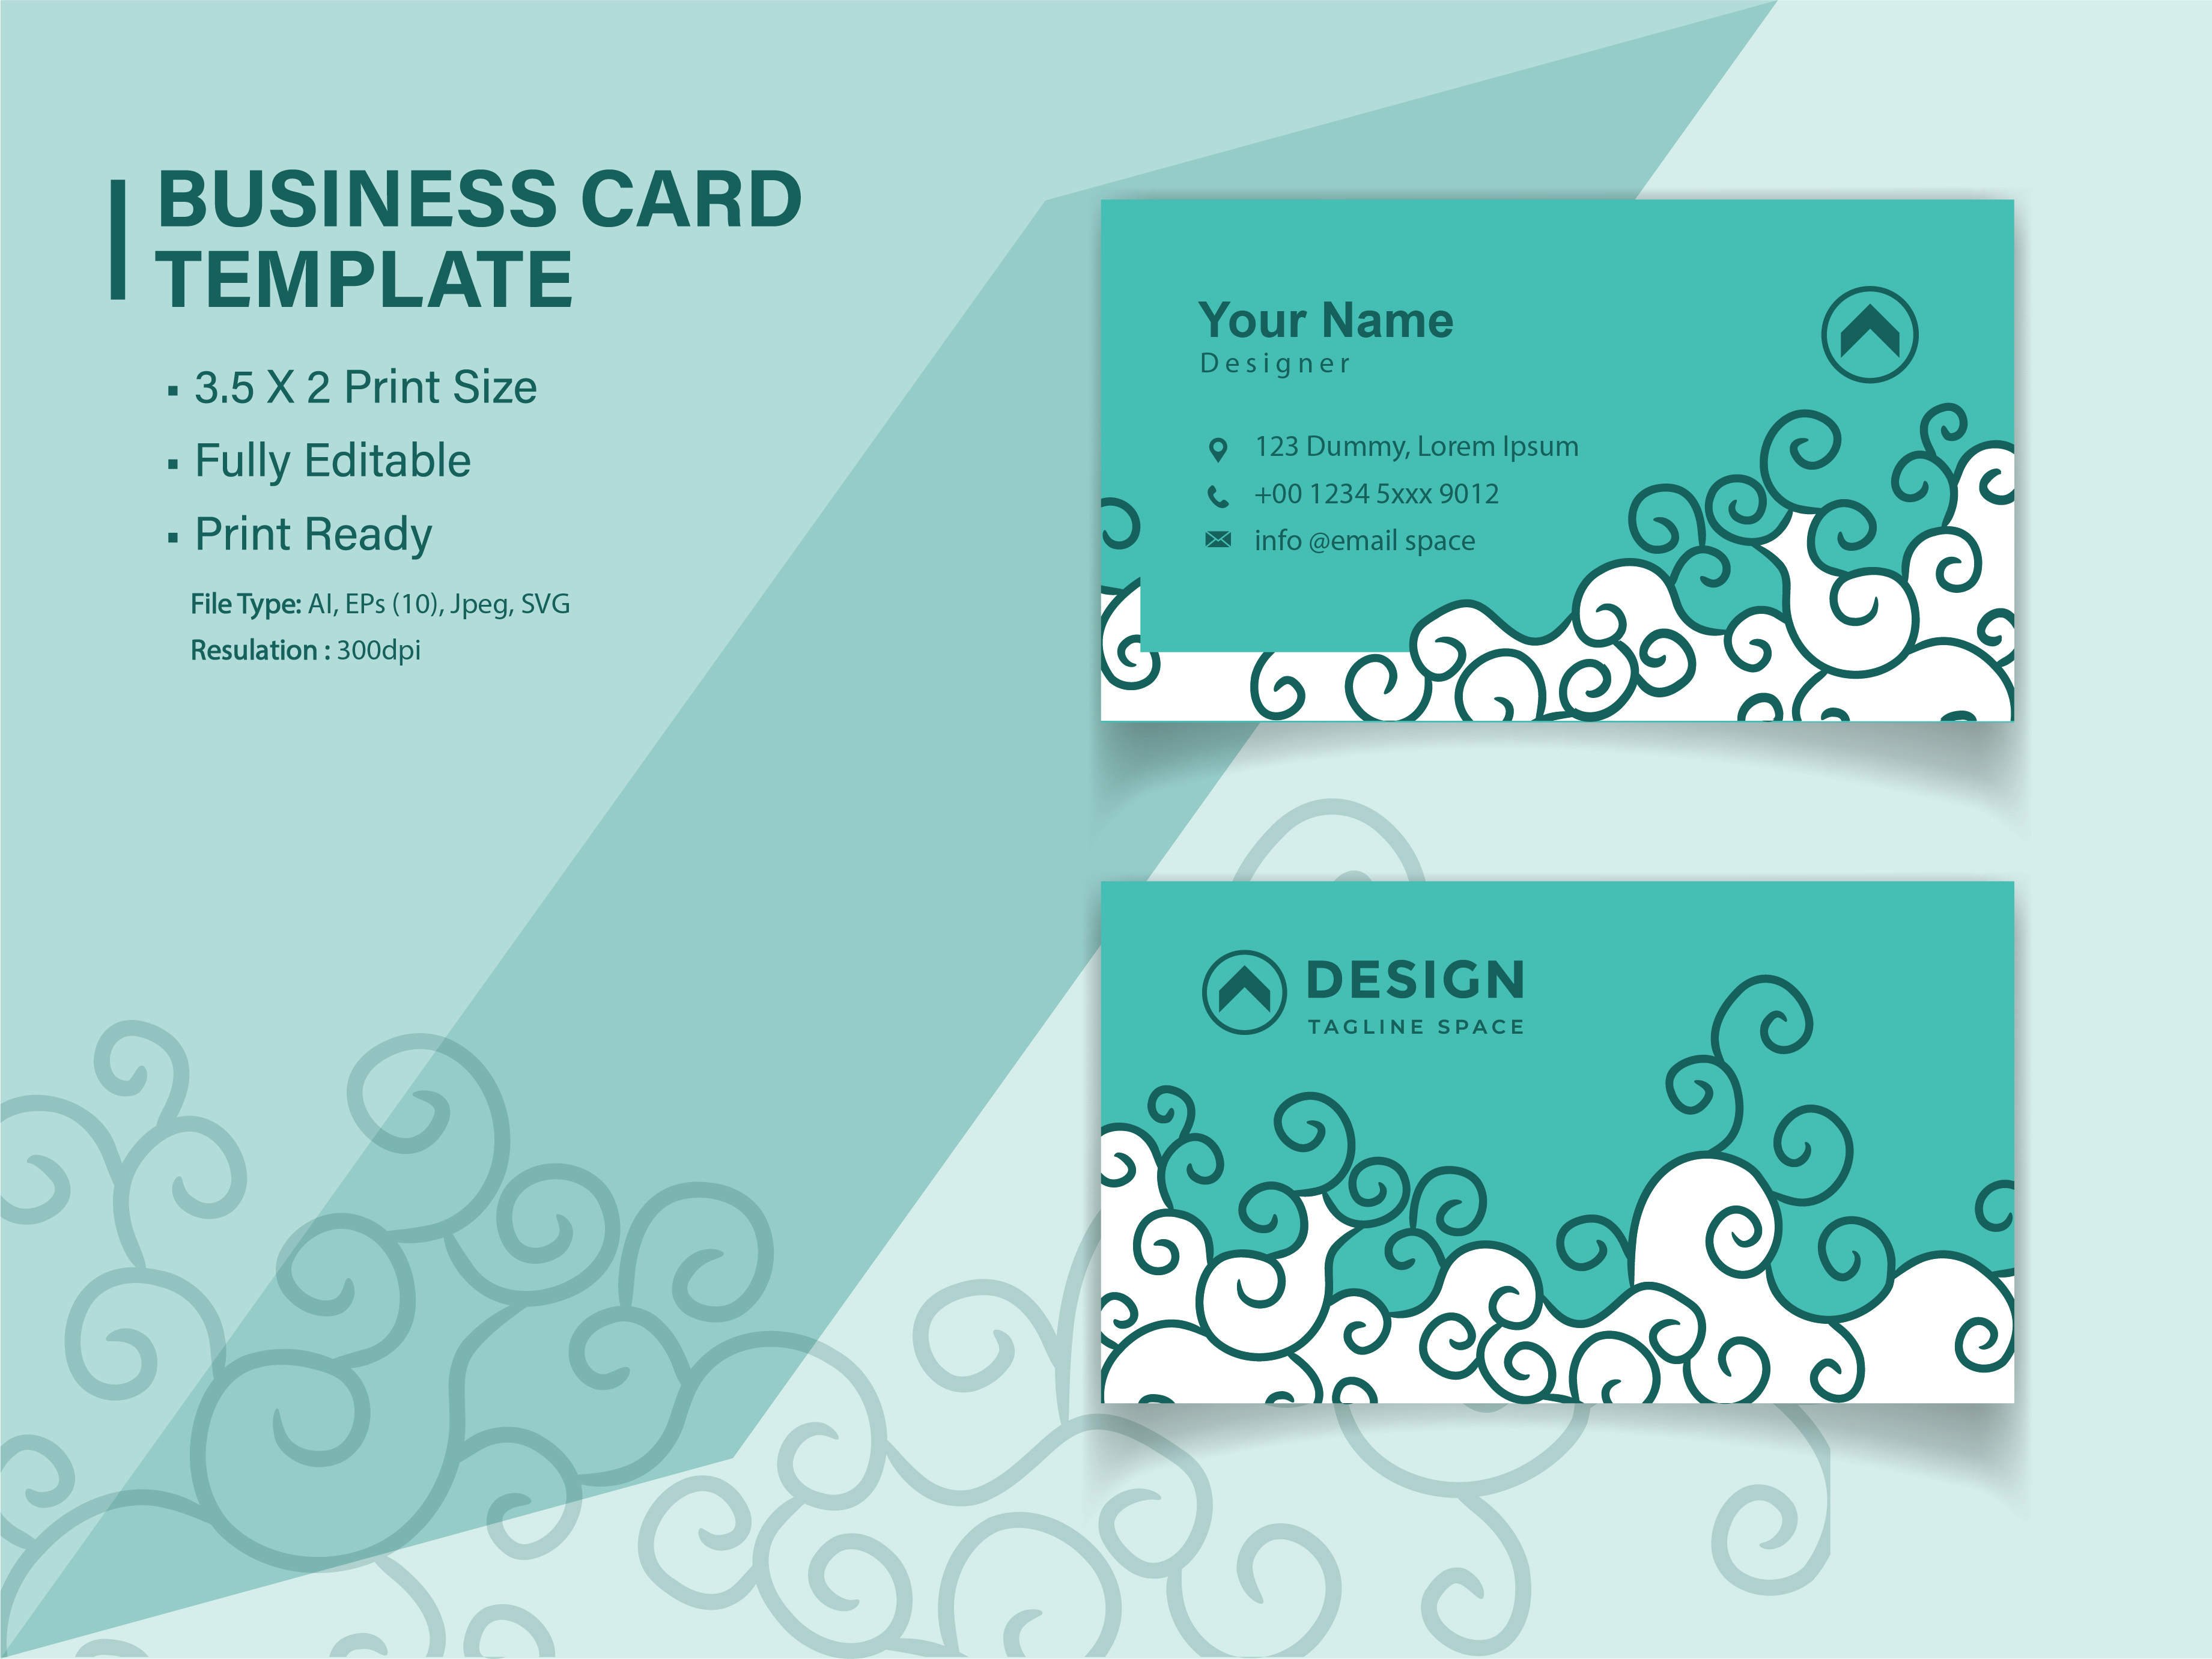 business card template 01 895